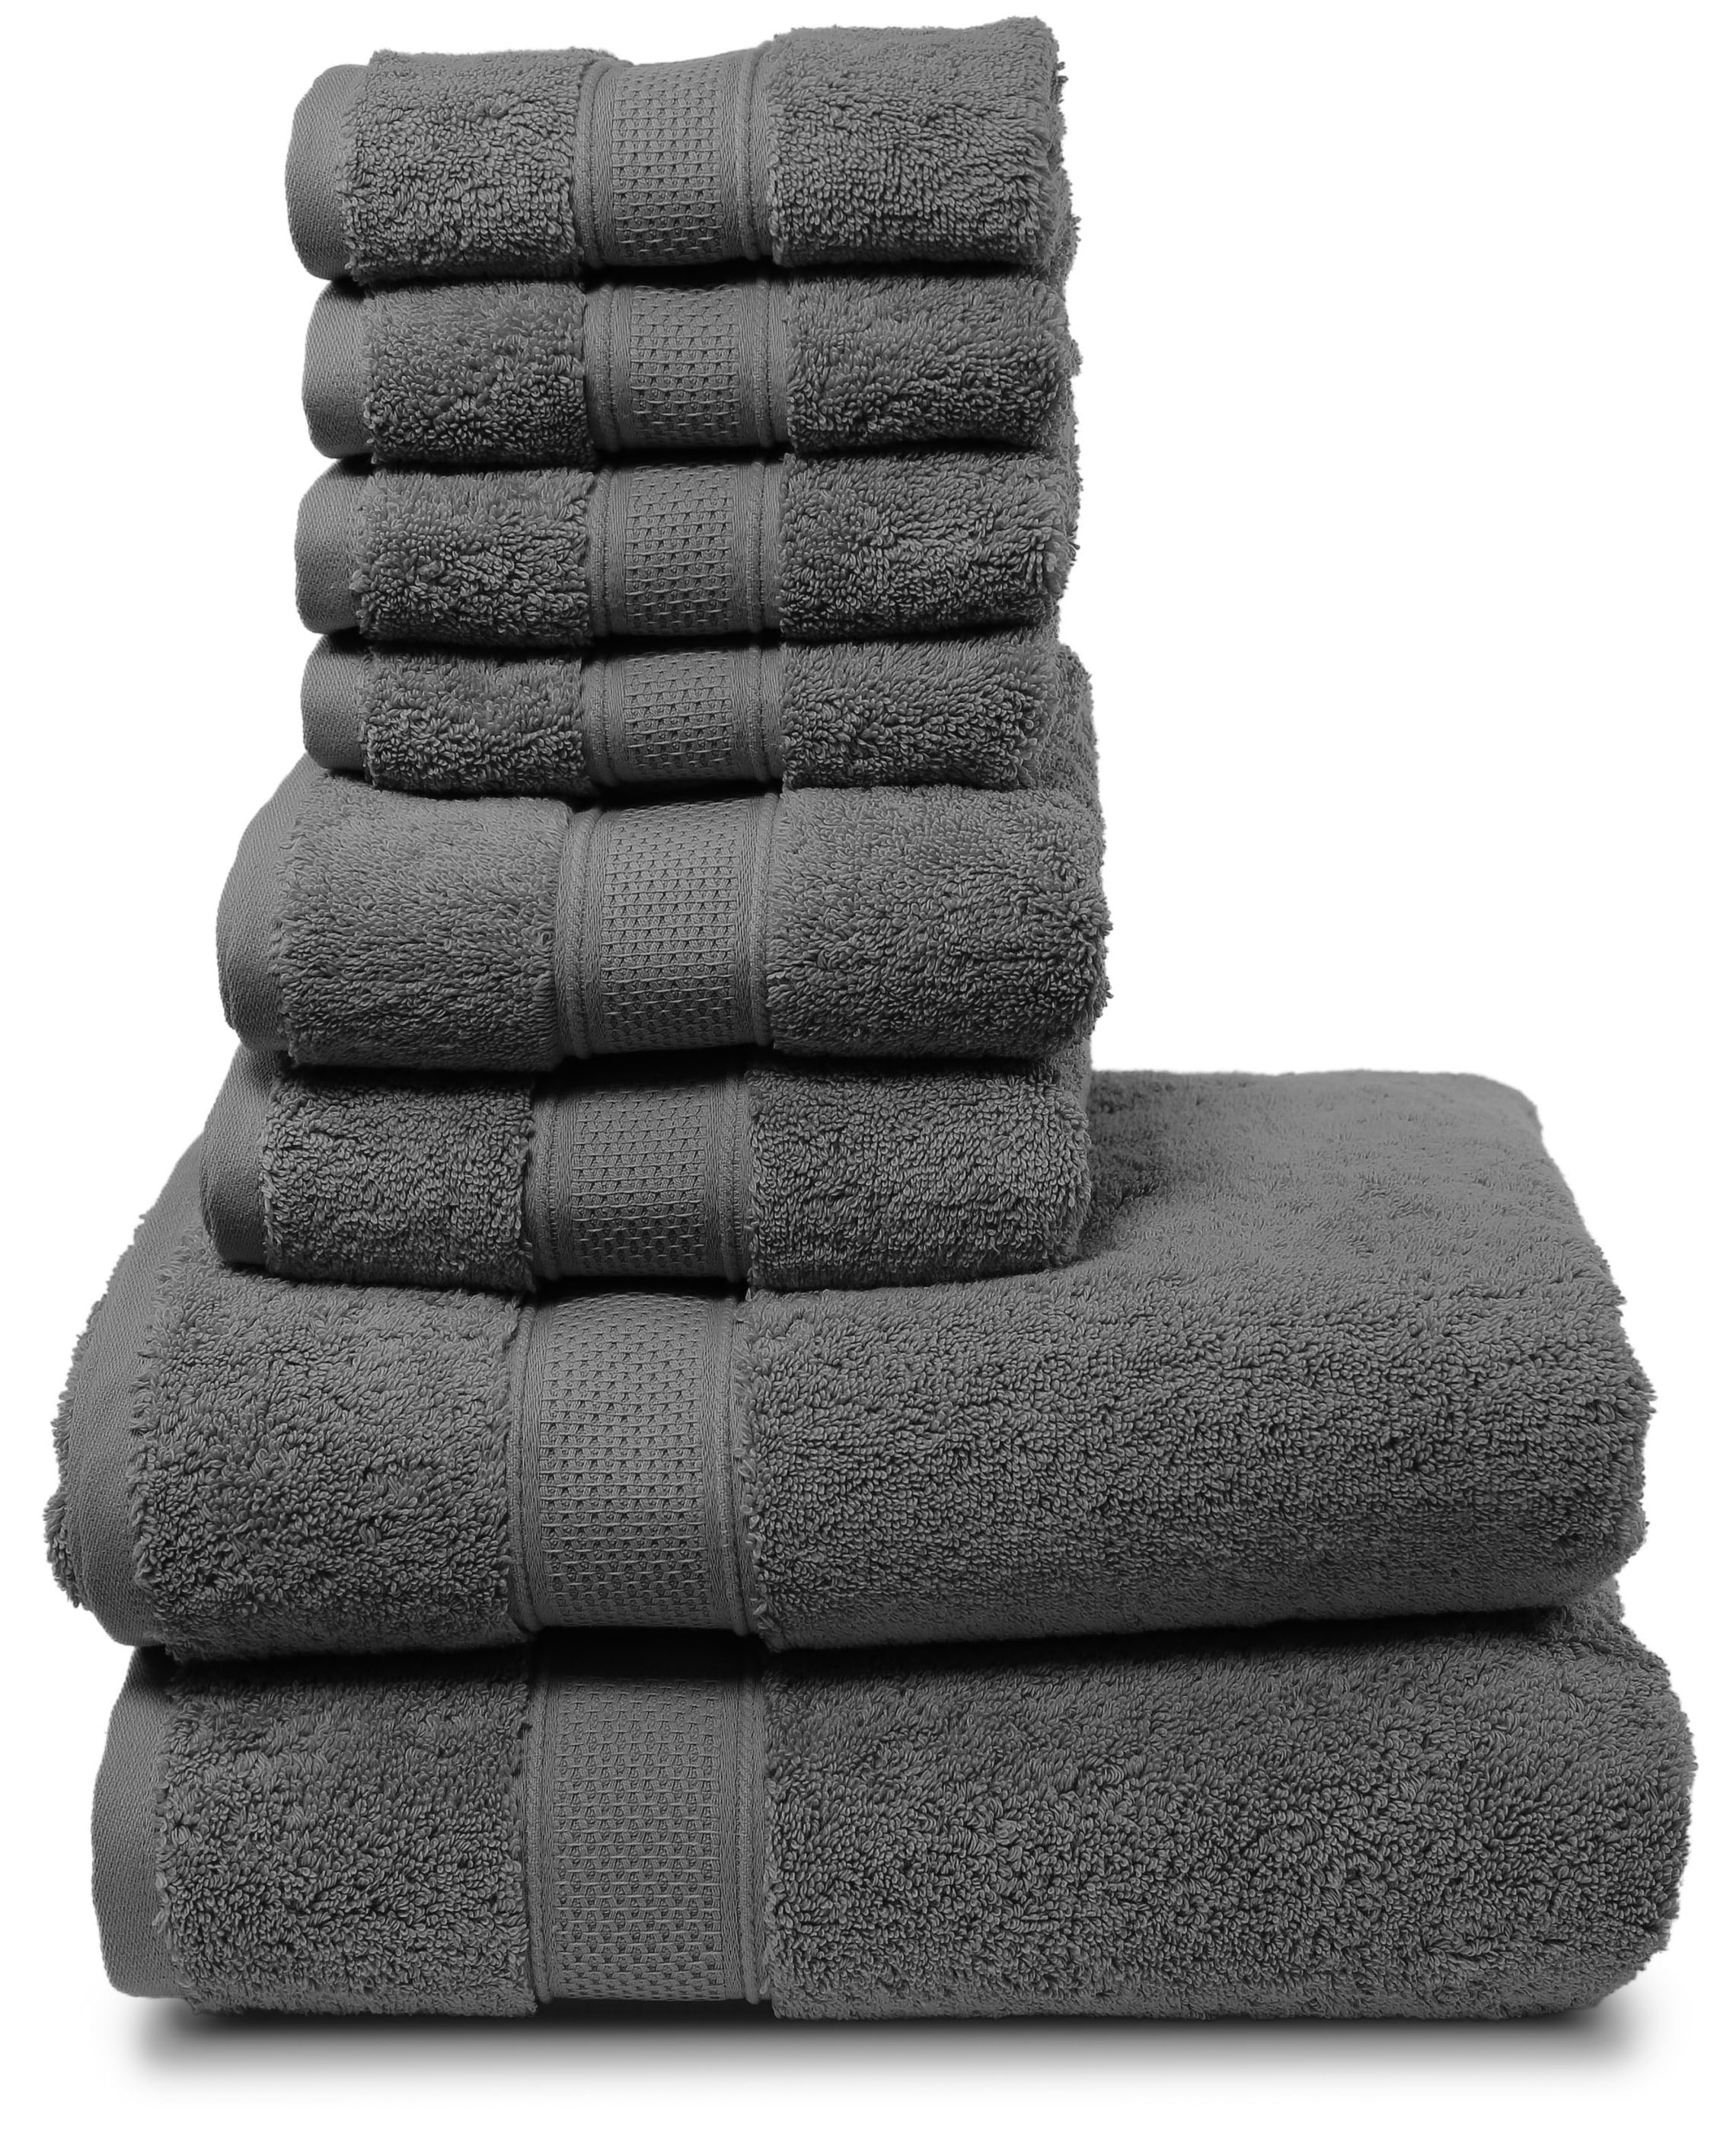 Maura 4 Piece Bath Towel Set. 2017(New Collection).Premium Quality Turkish Towels. Super Soft, Plush and Highly Absorbent. Set Includ